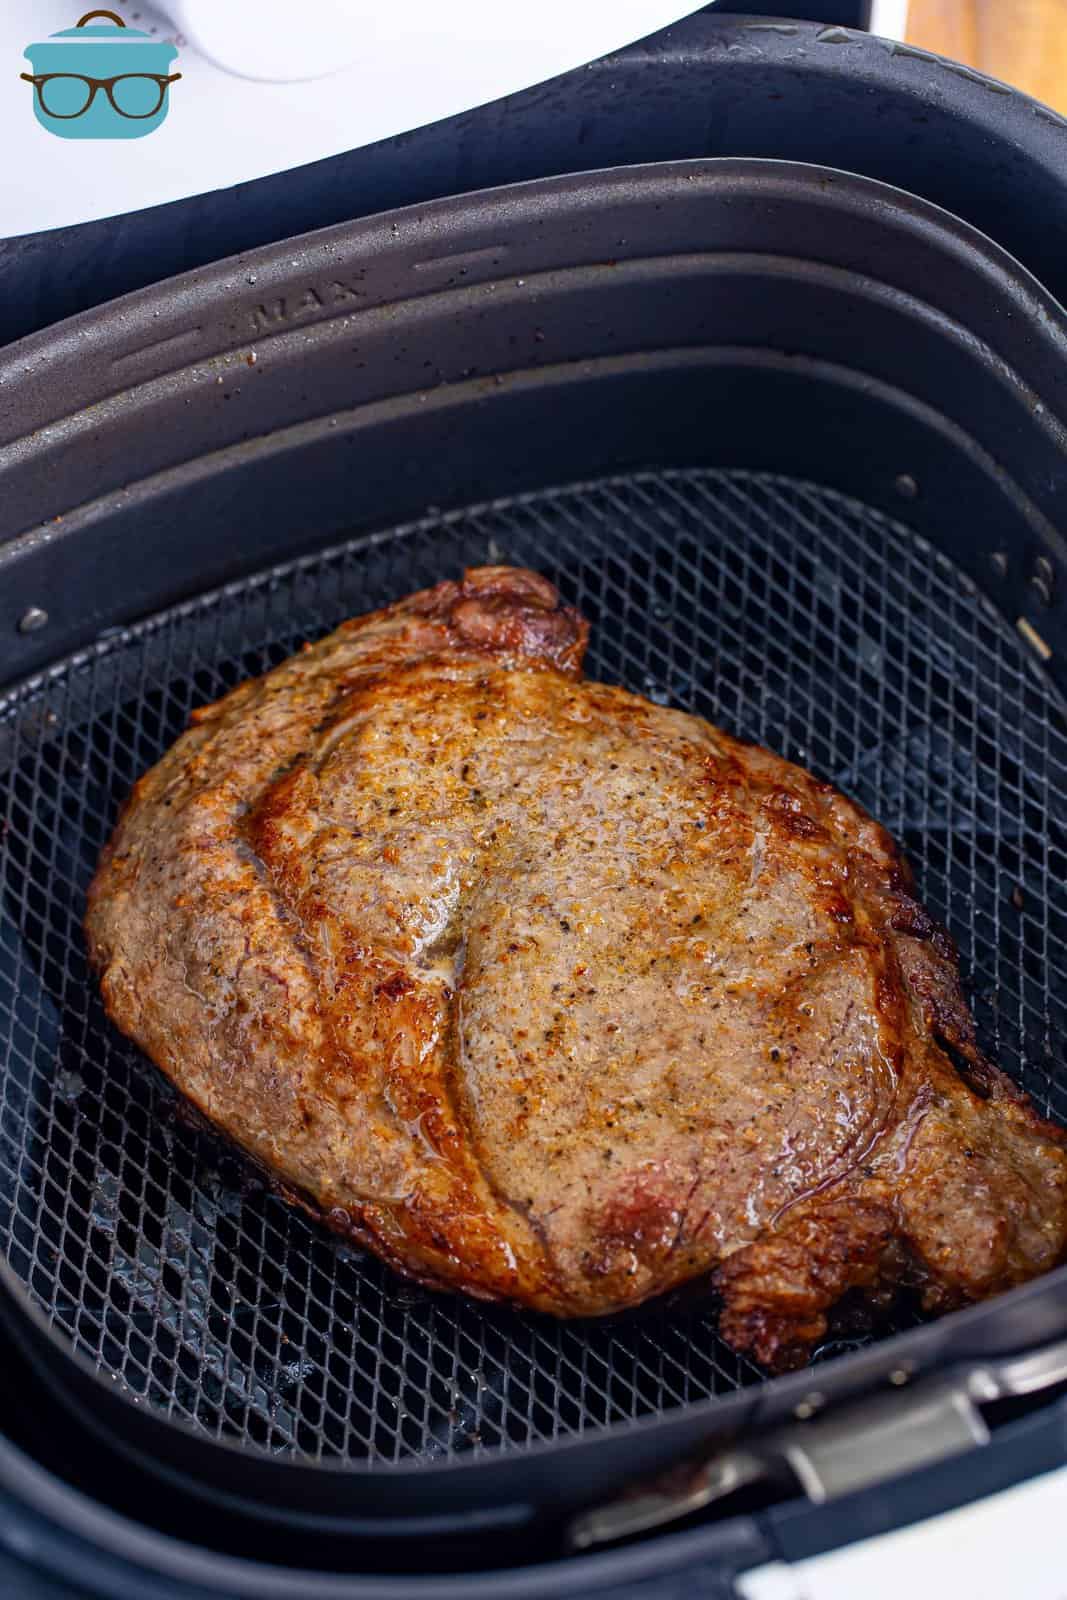 A perfectly cooked Ribeye Steak in the Air Fryer basket.